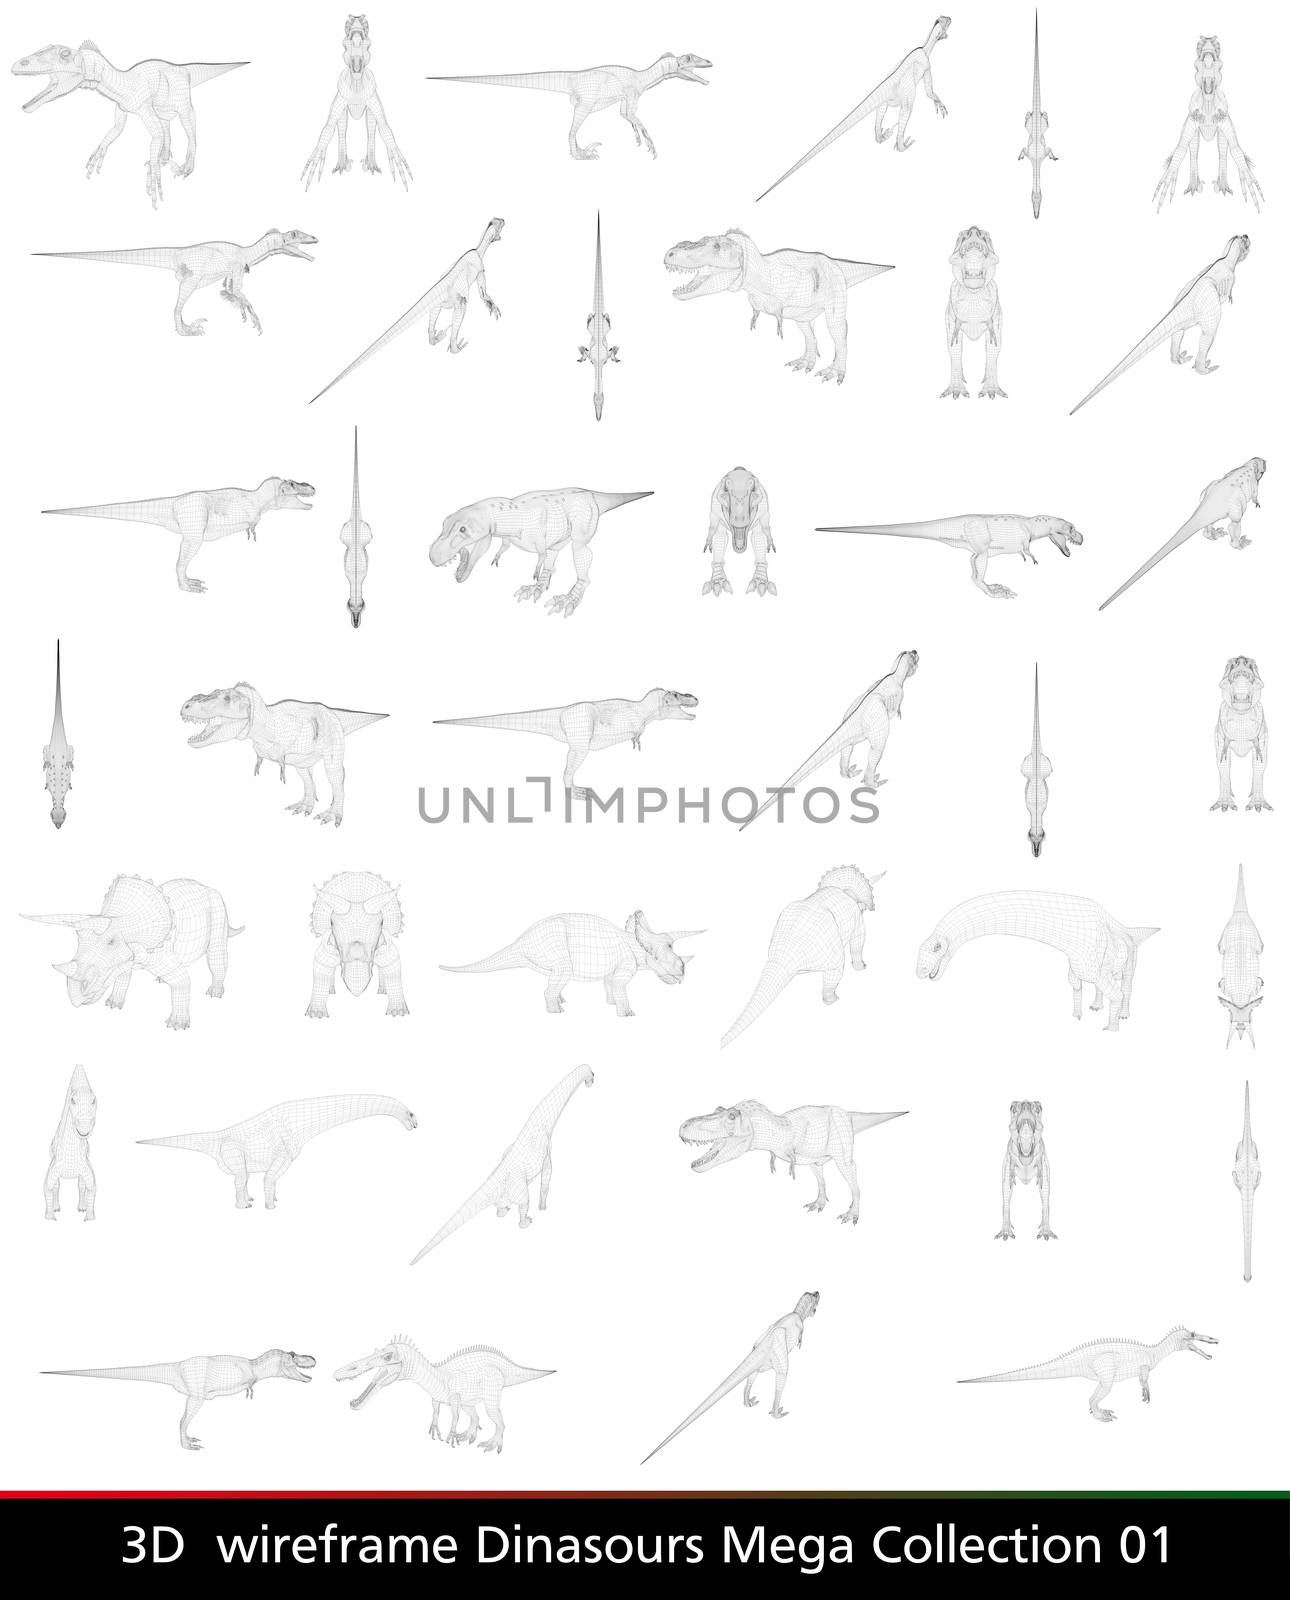 3d wireframe dinasour collection isolated on white background